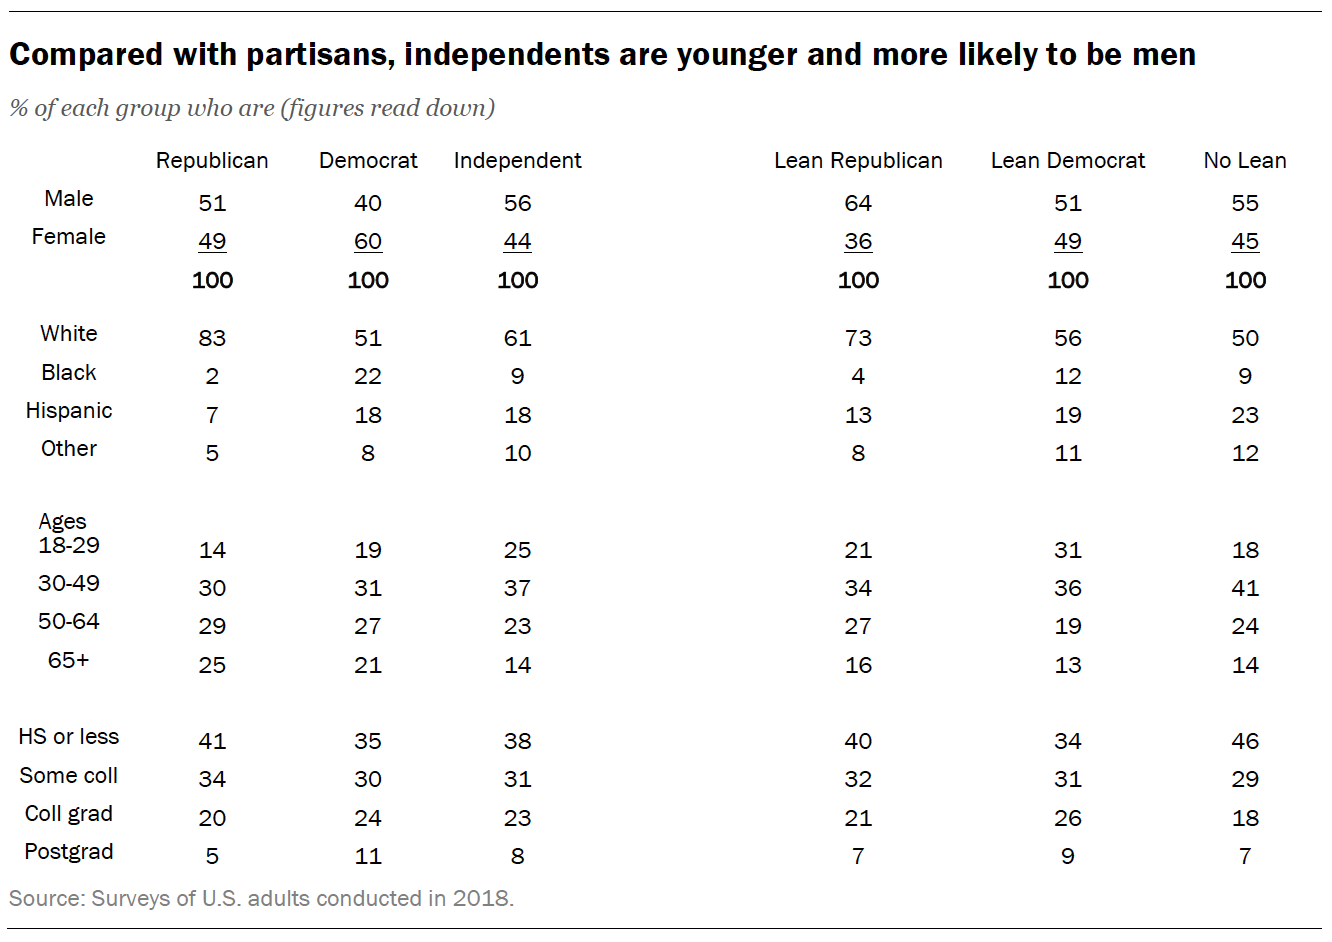 Compared with partisans, independents are younger and more likely to be men